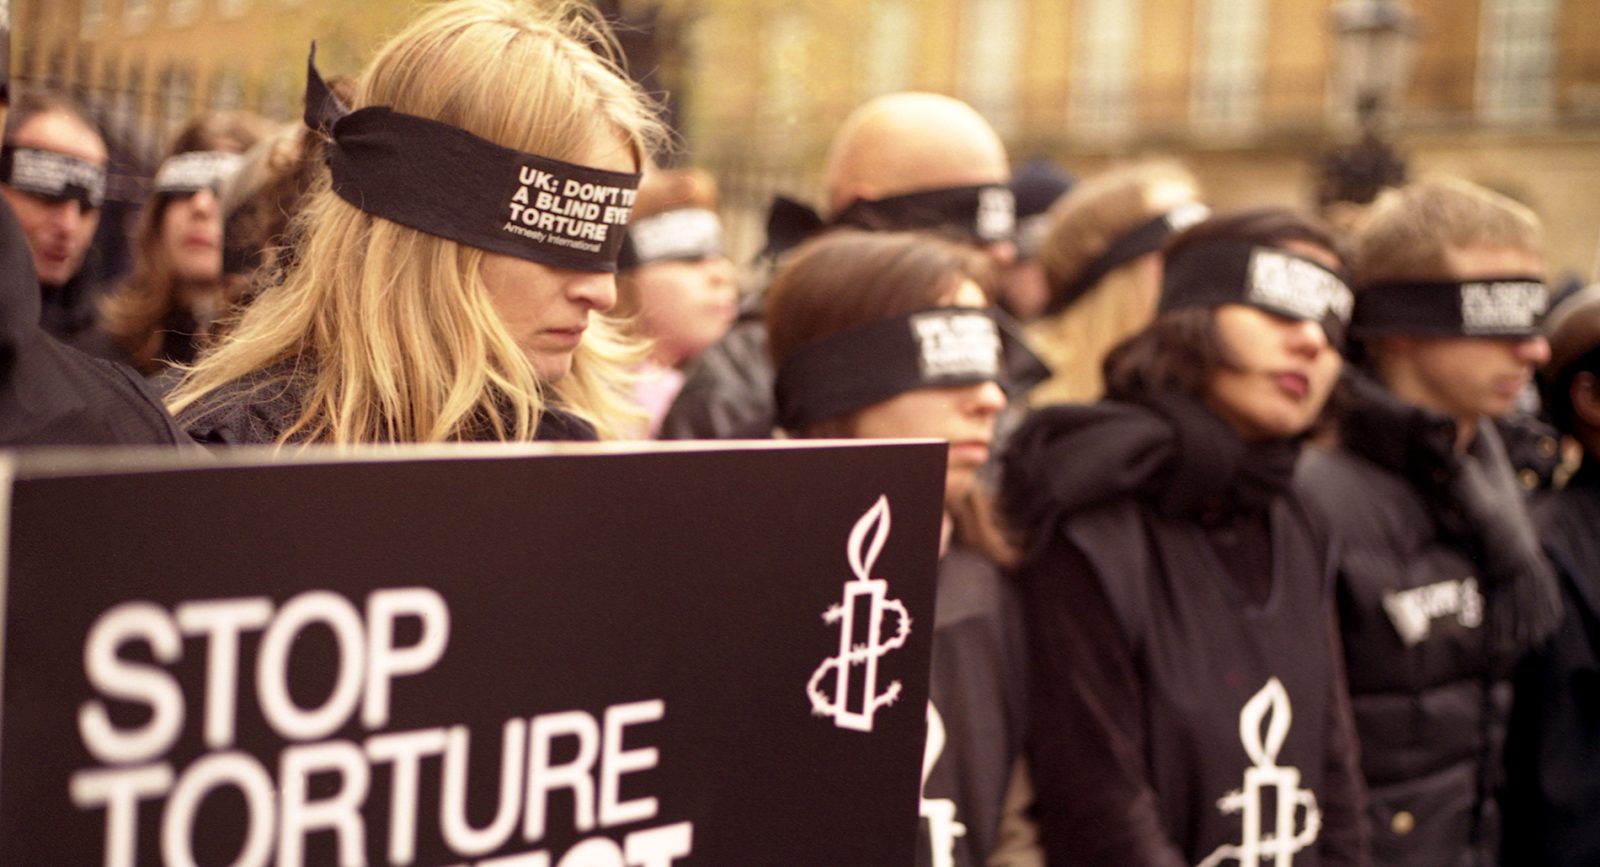 Activists at UK rally wearing 'Stope torture' shirts and blindfolds over their eyes.